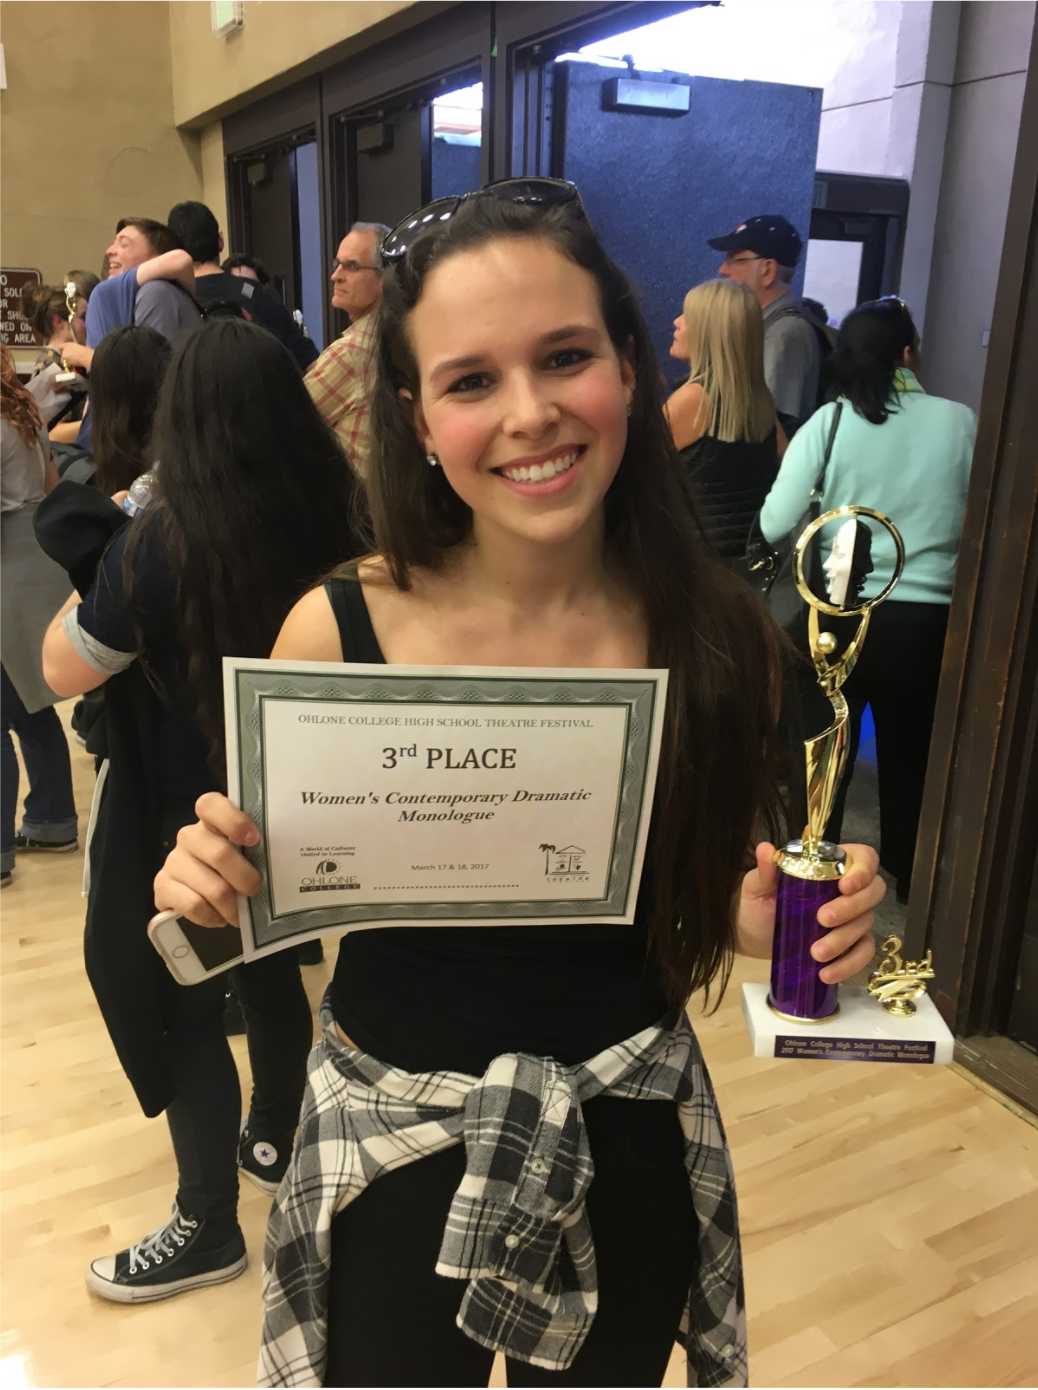  Senior Madelyn Levine smiles with her certificate and trophy. She won third place for her Contemporary Dramatic monologue from Girl . 